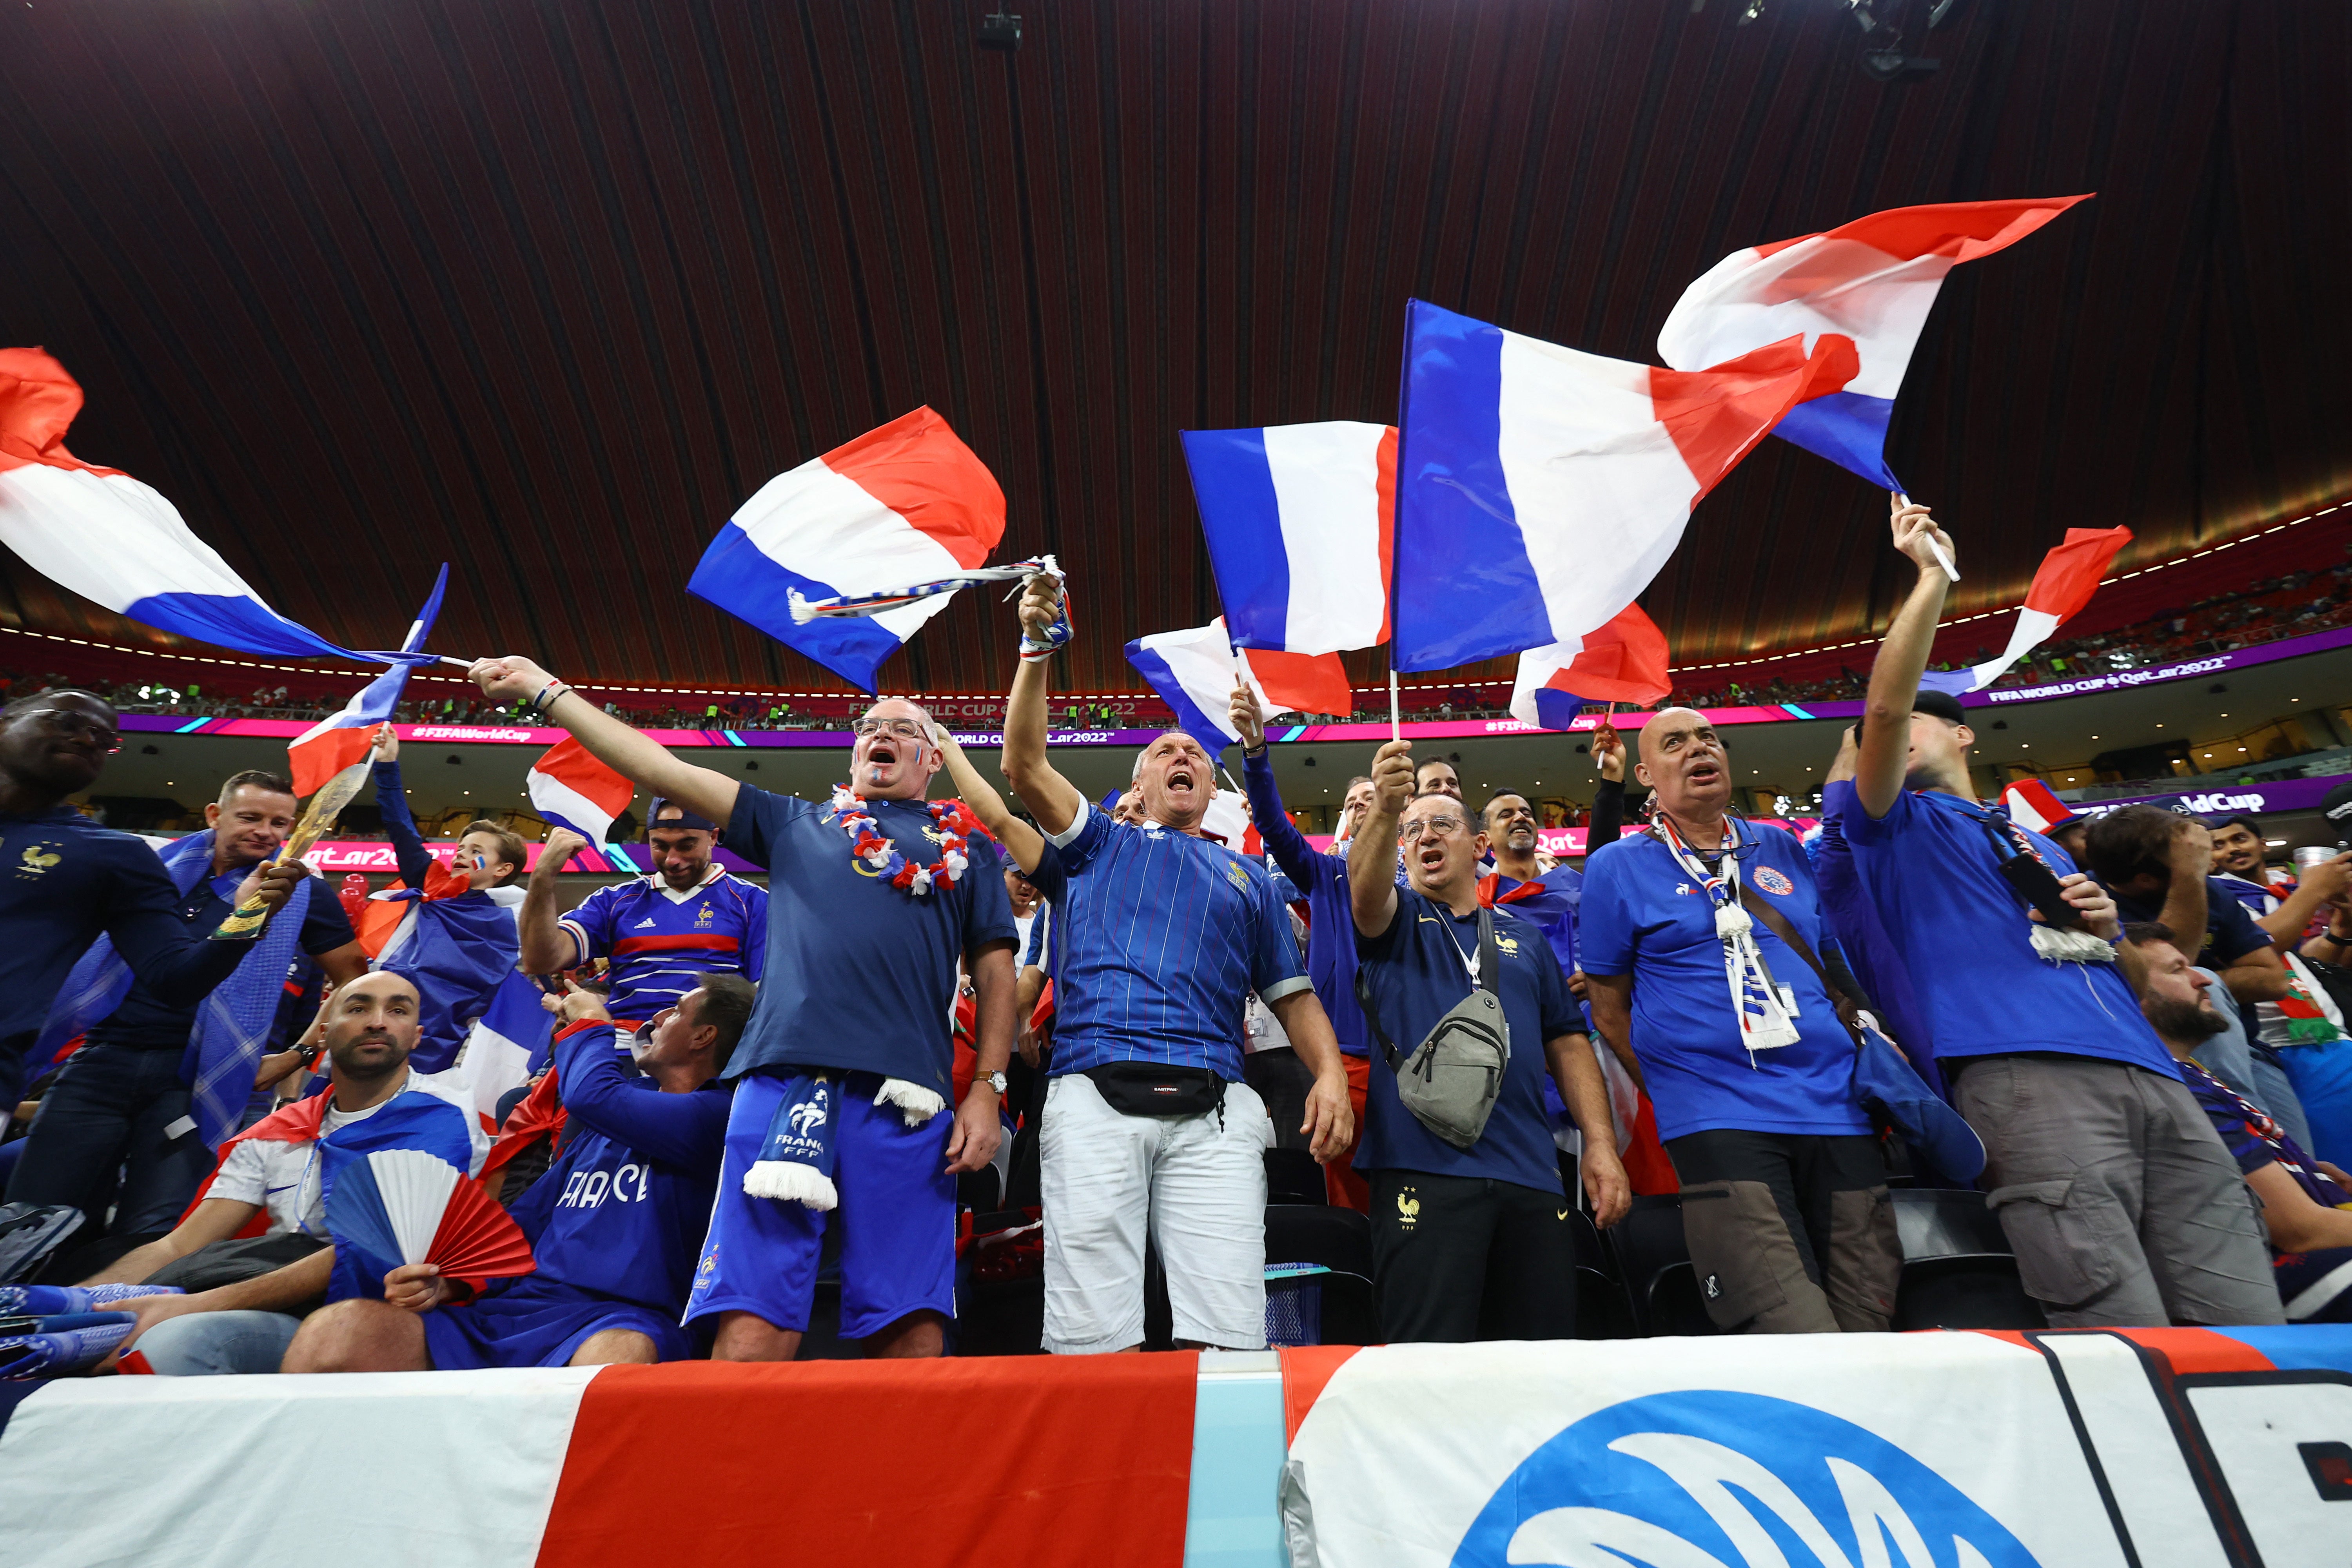 France fans haven’t travelled in huge numbers